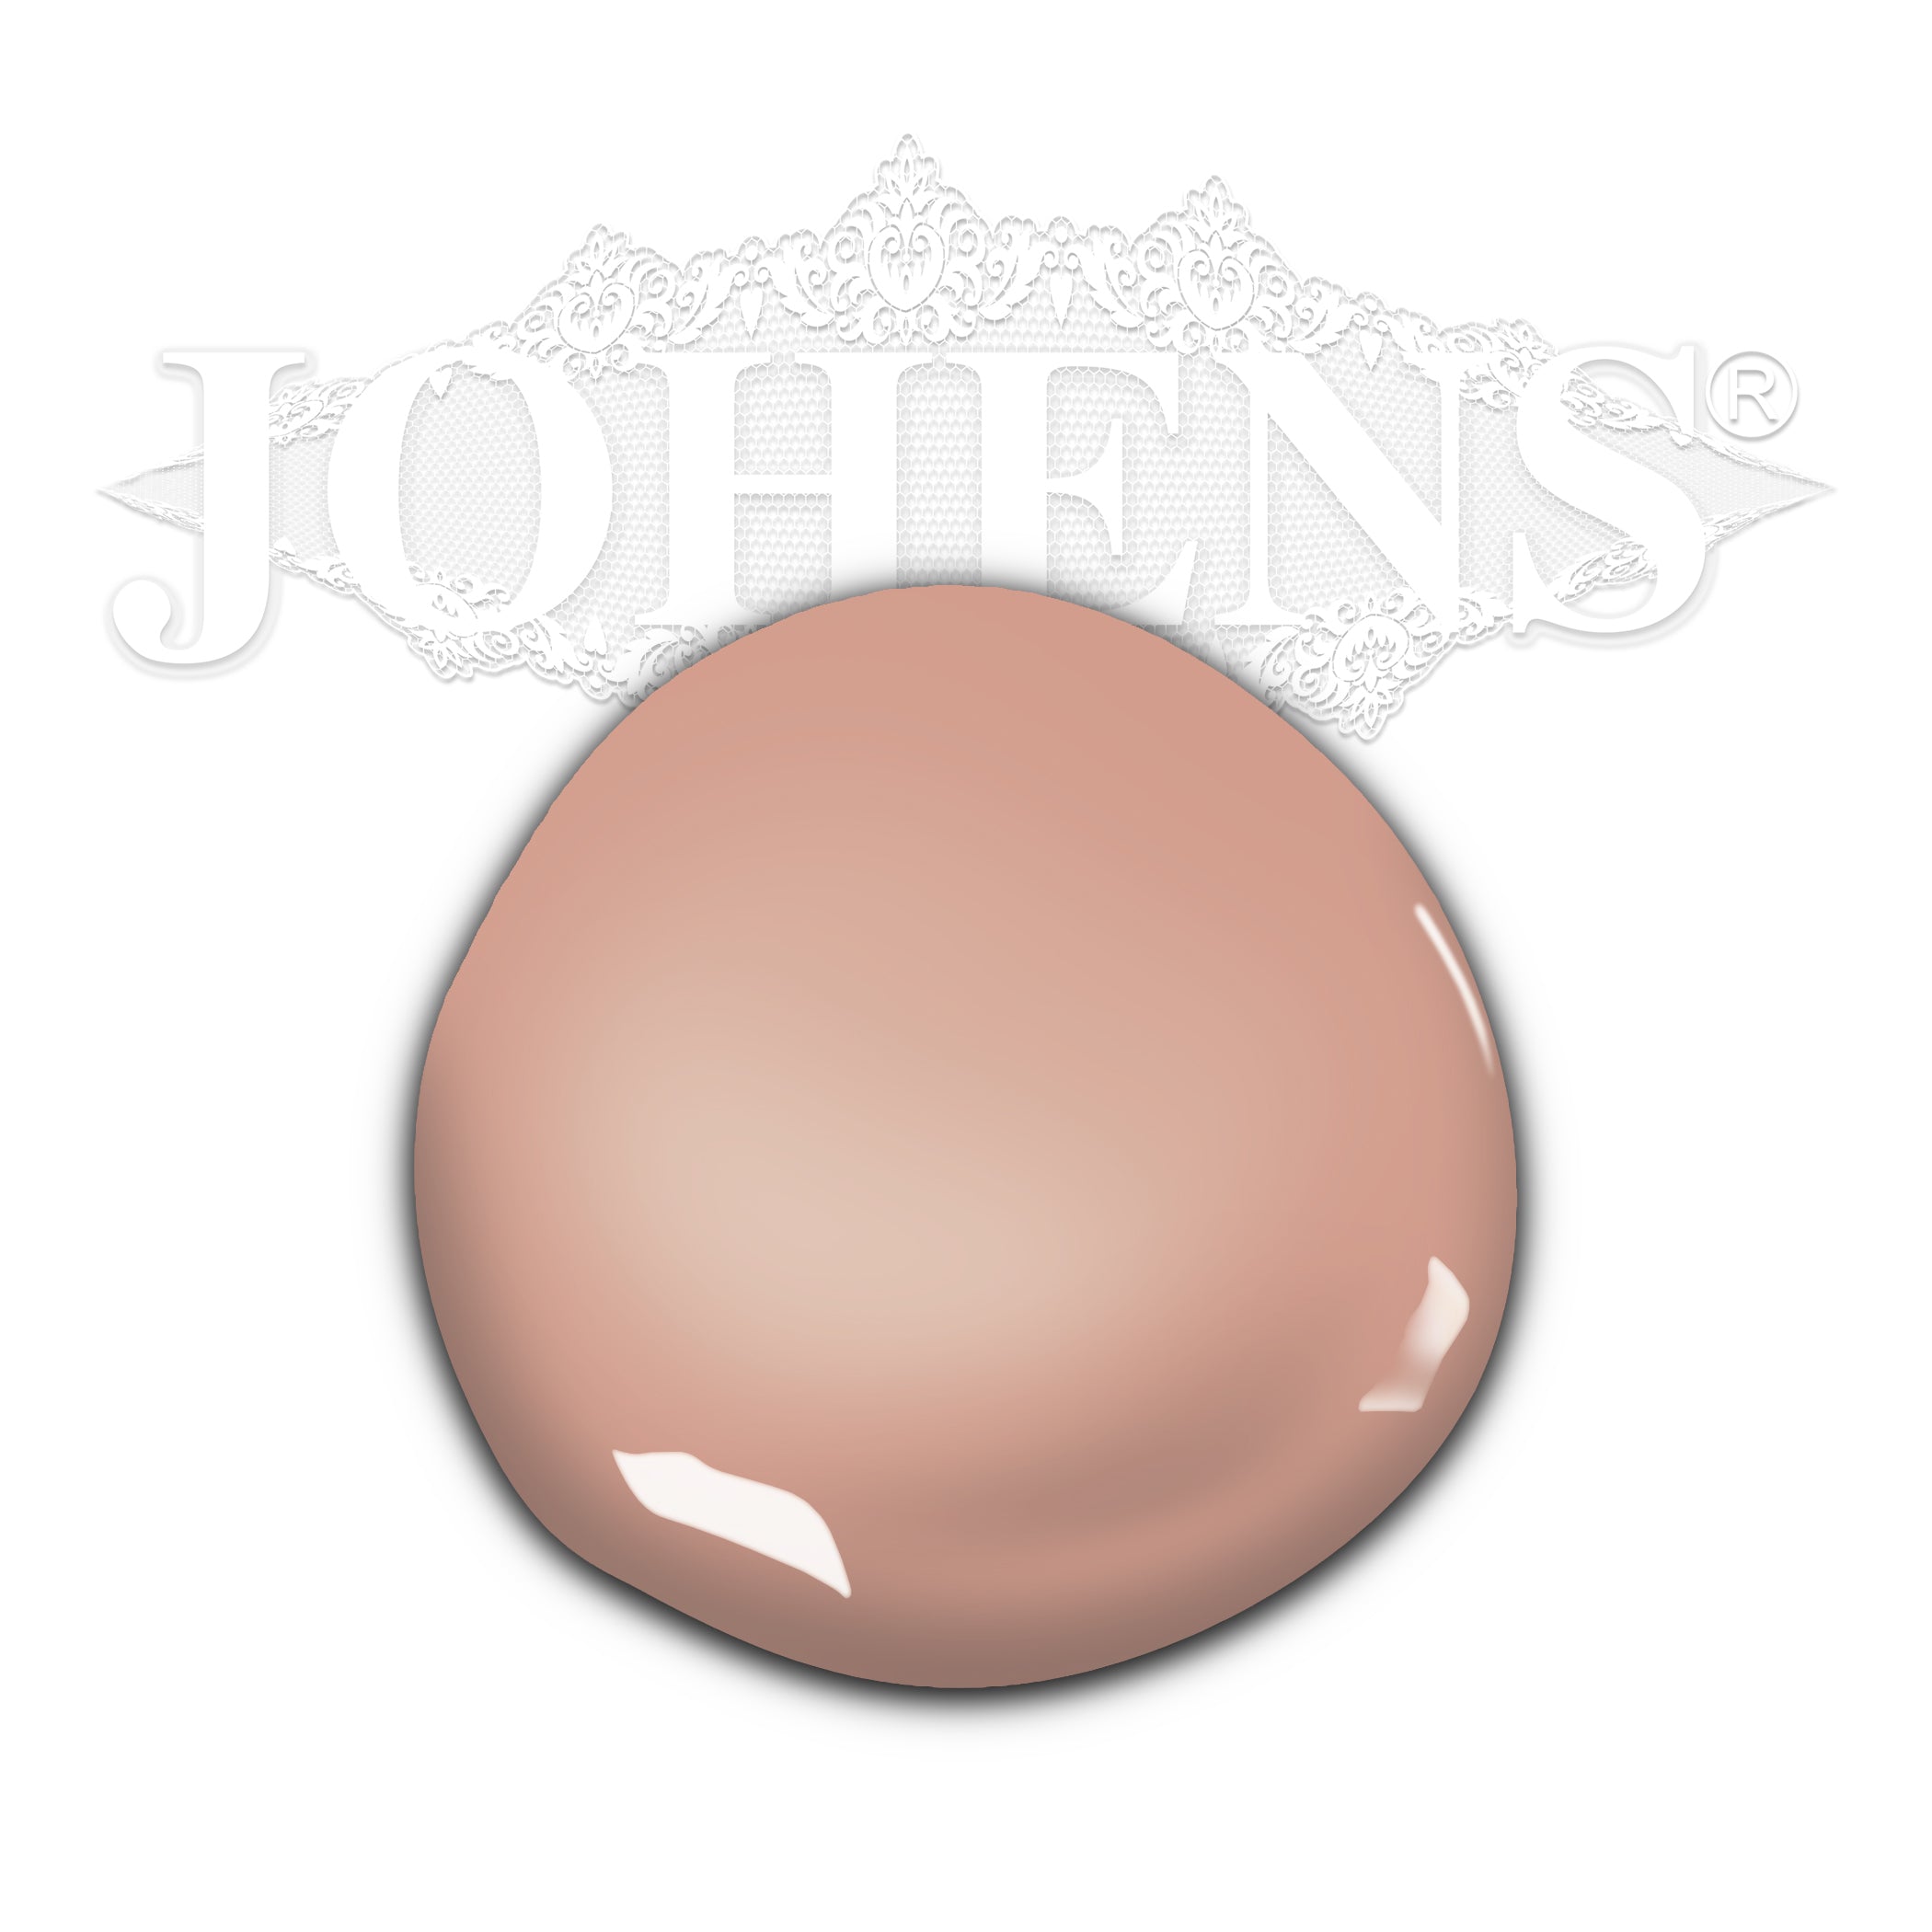 Cover Pink - Natural Peach camouflage 18g/0.63oz